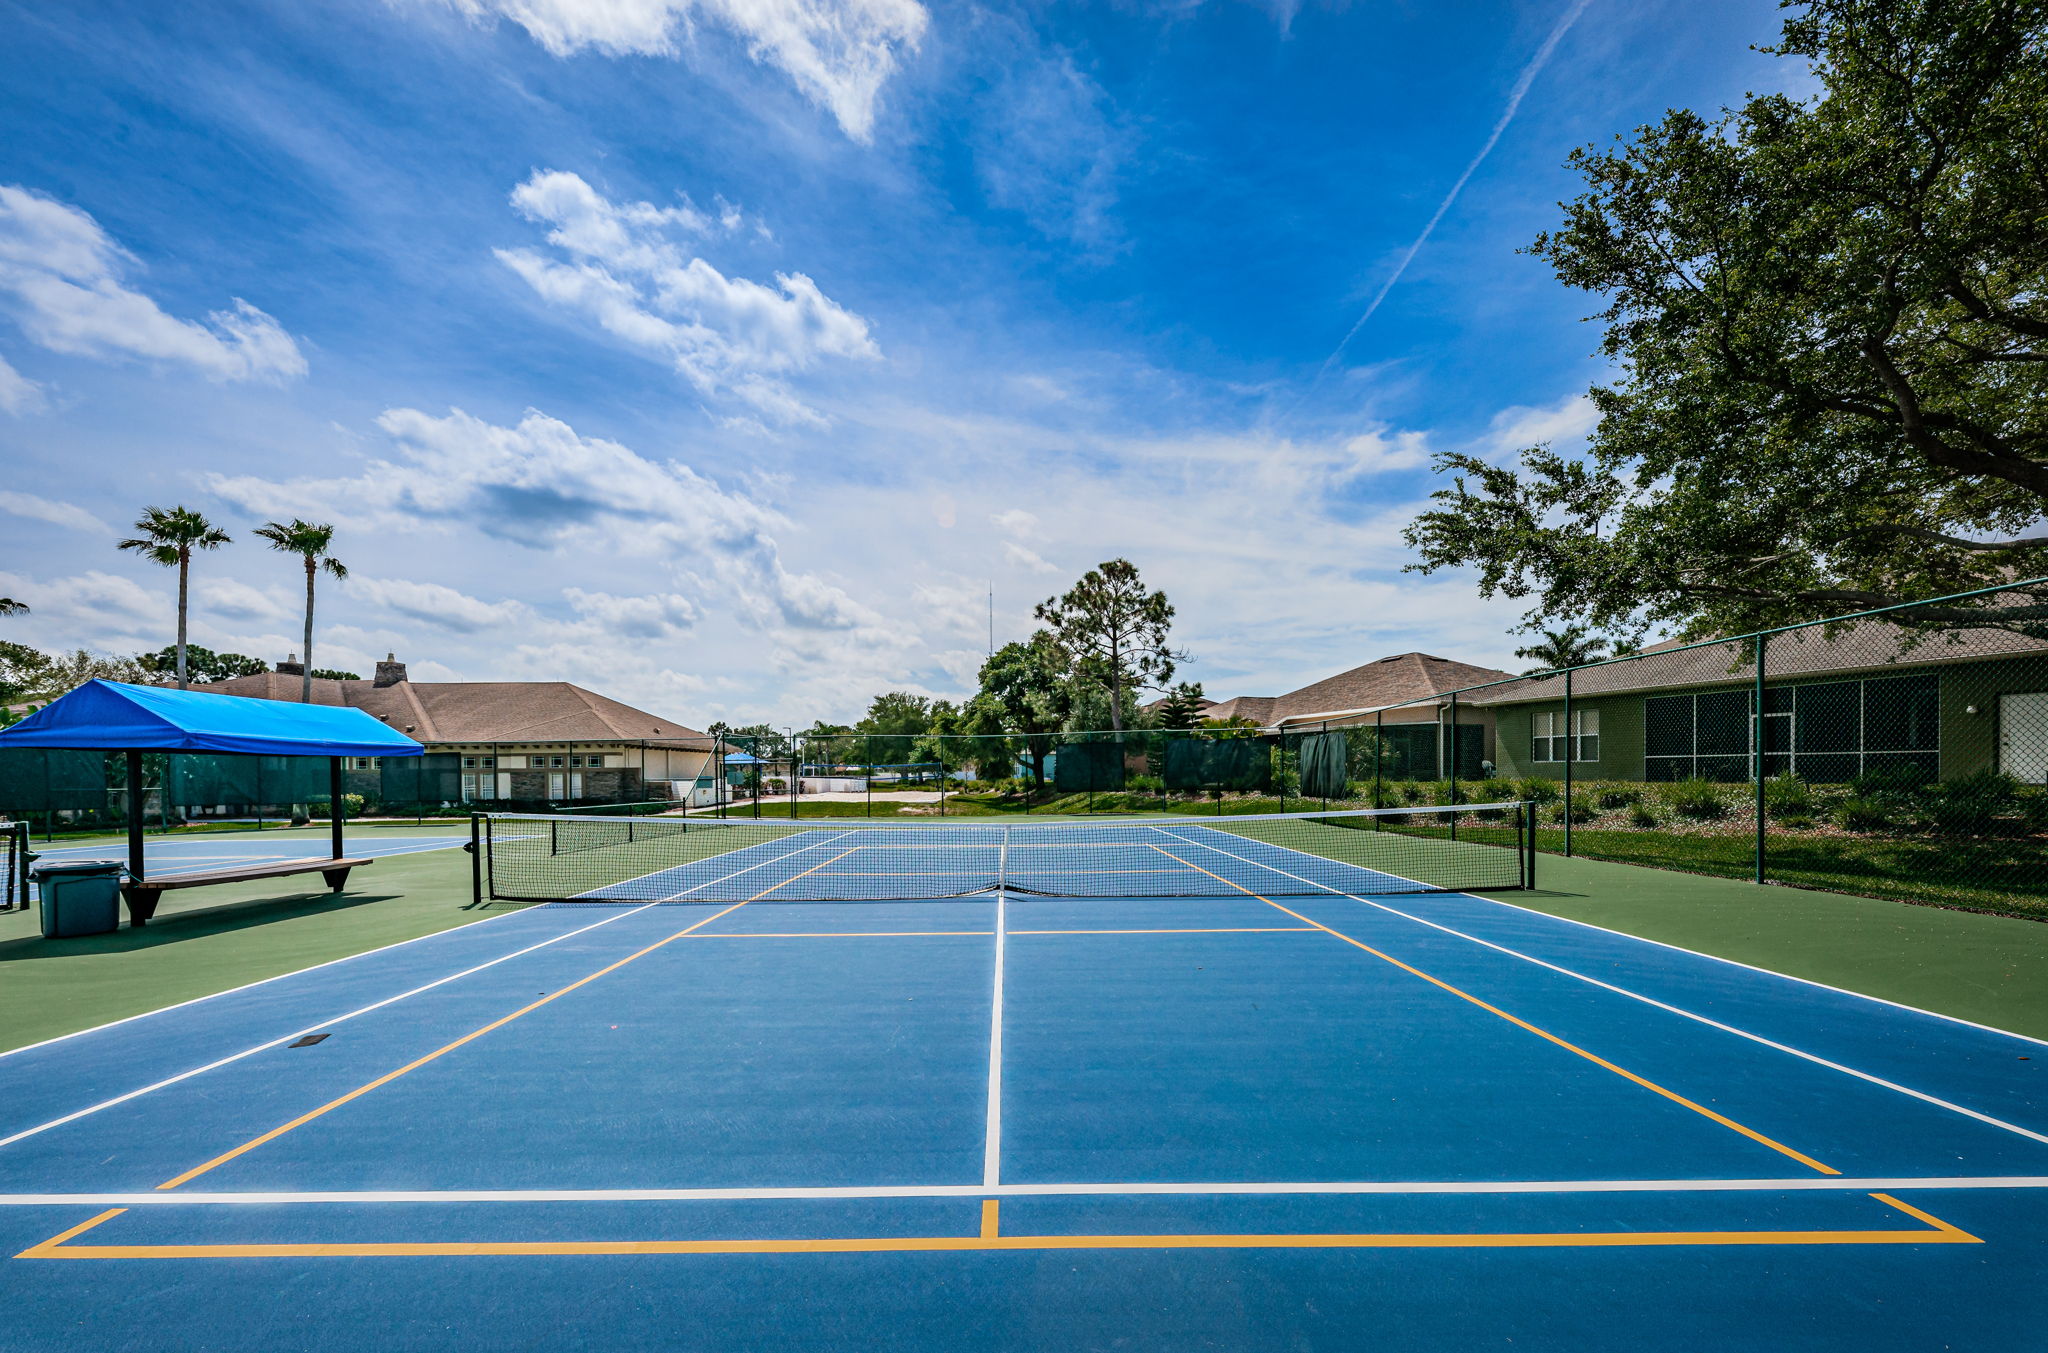 34-Tennis and Pickelball Courts